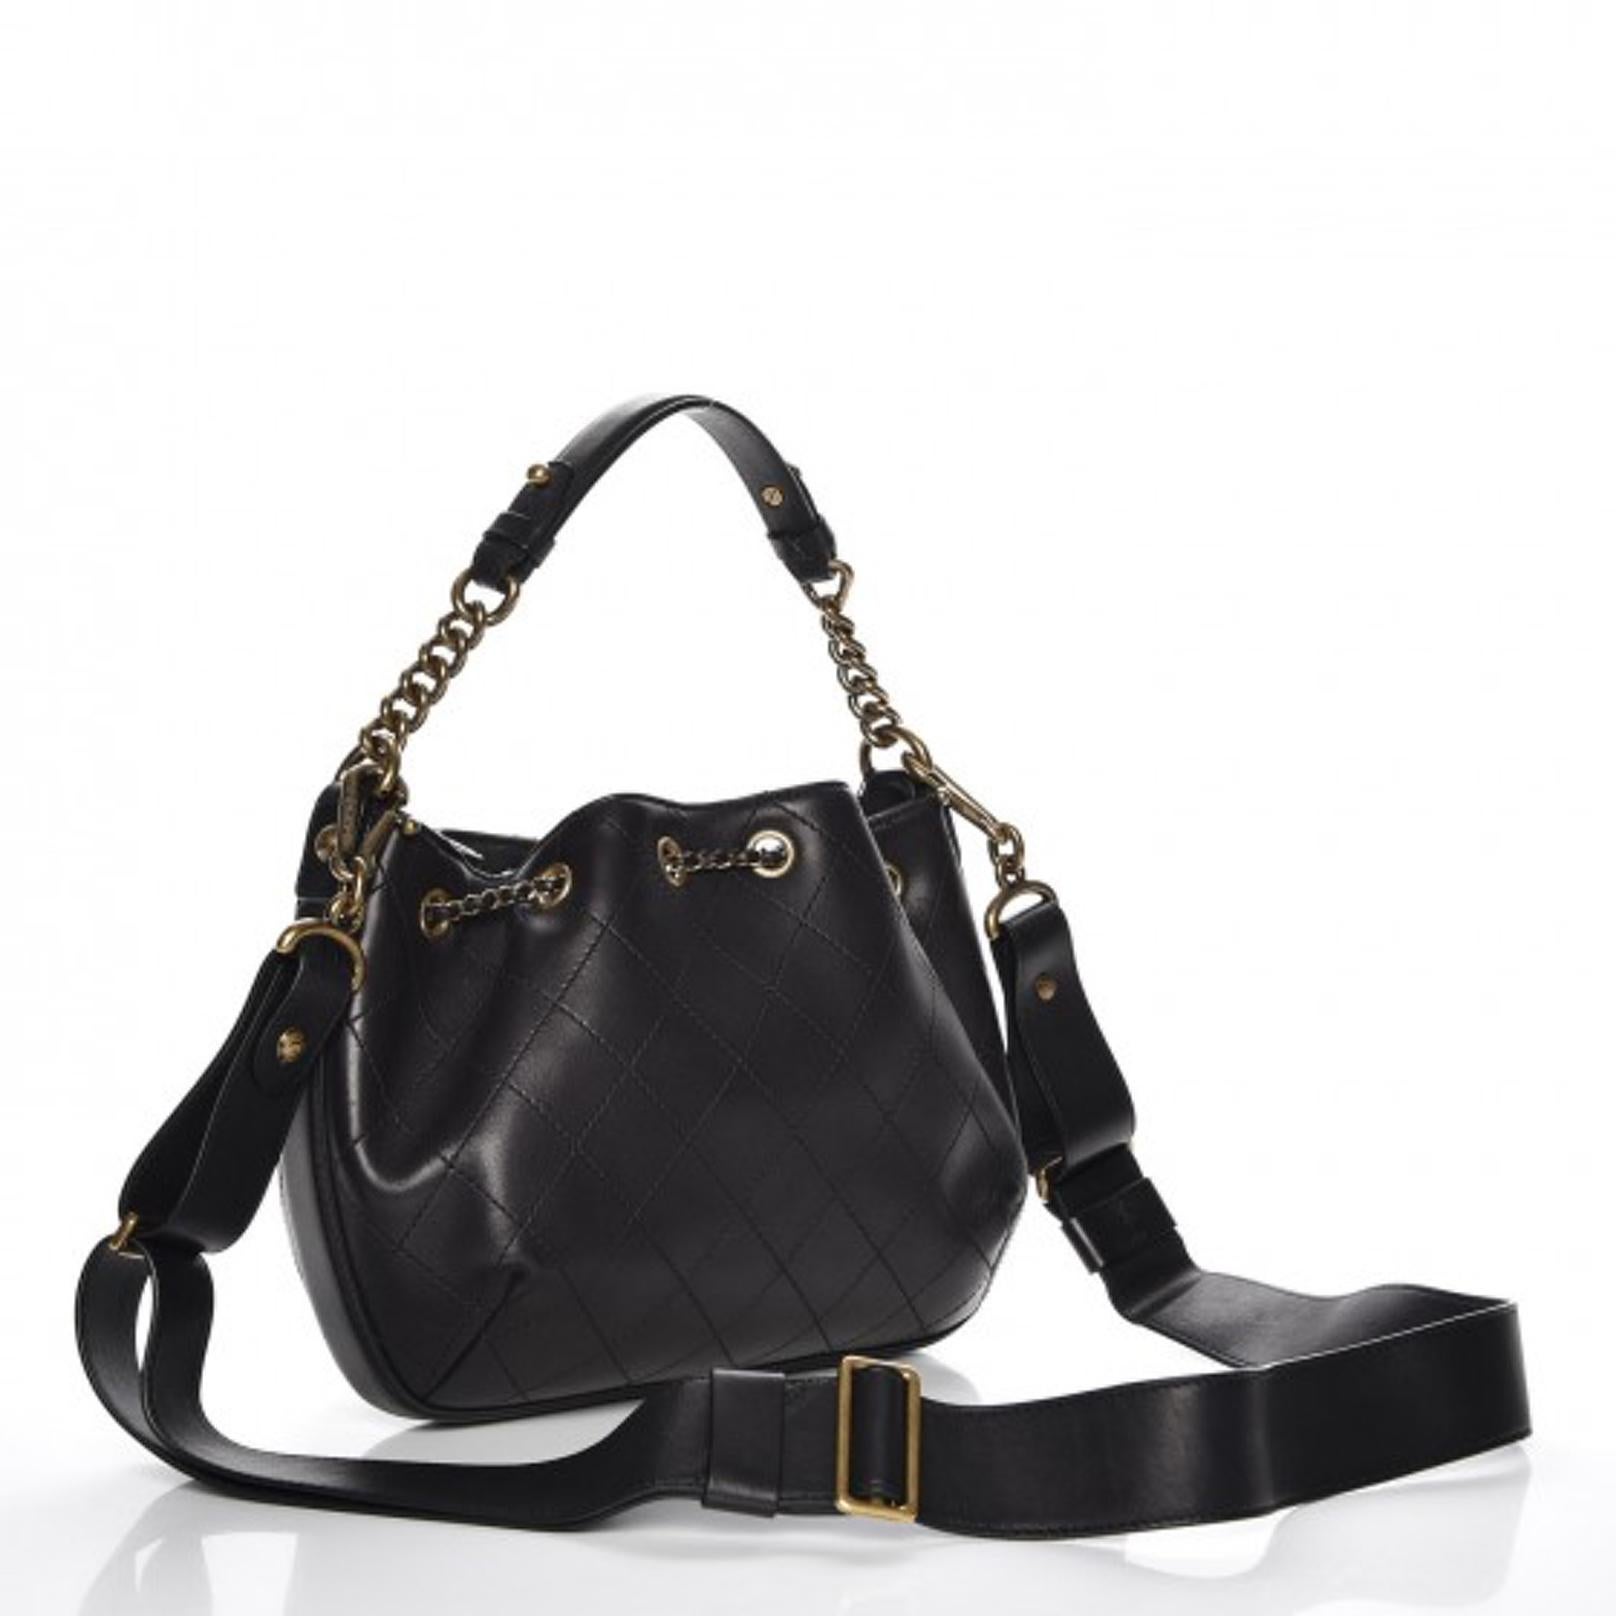 This hand bag is made with soft diamond stitched calfskin leather in black. The bag features a chain and leather top handle, an optional shoulder strap, aged gold hardware, drawstring closure and an interior with black microfiber with a zip and